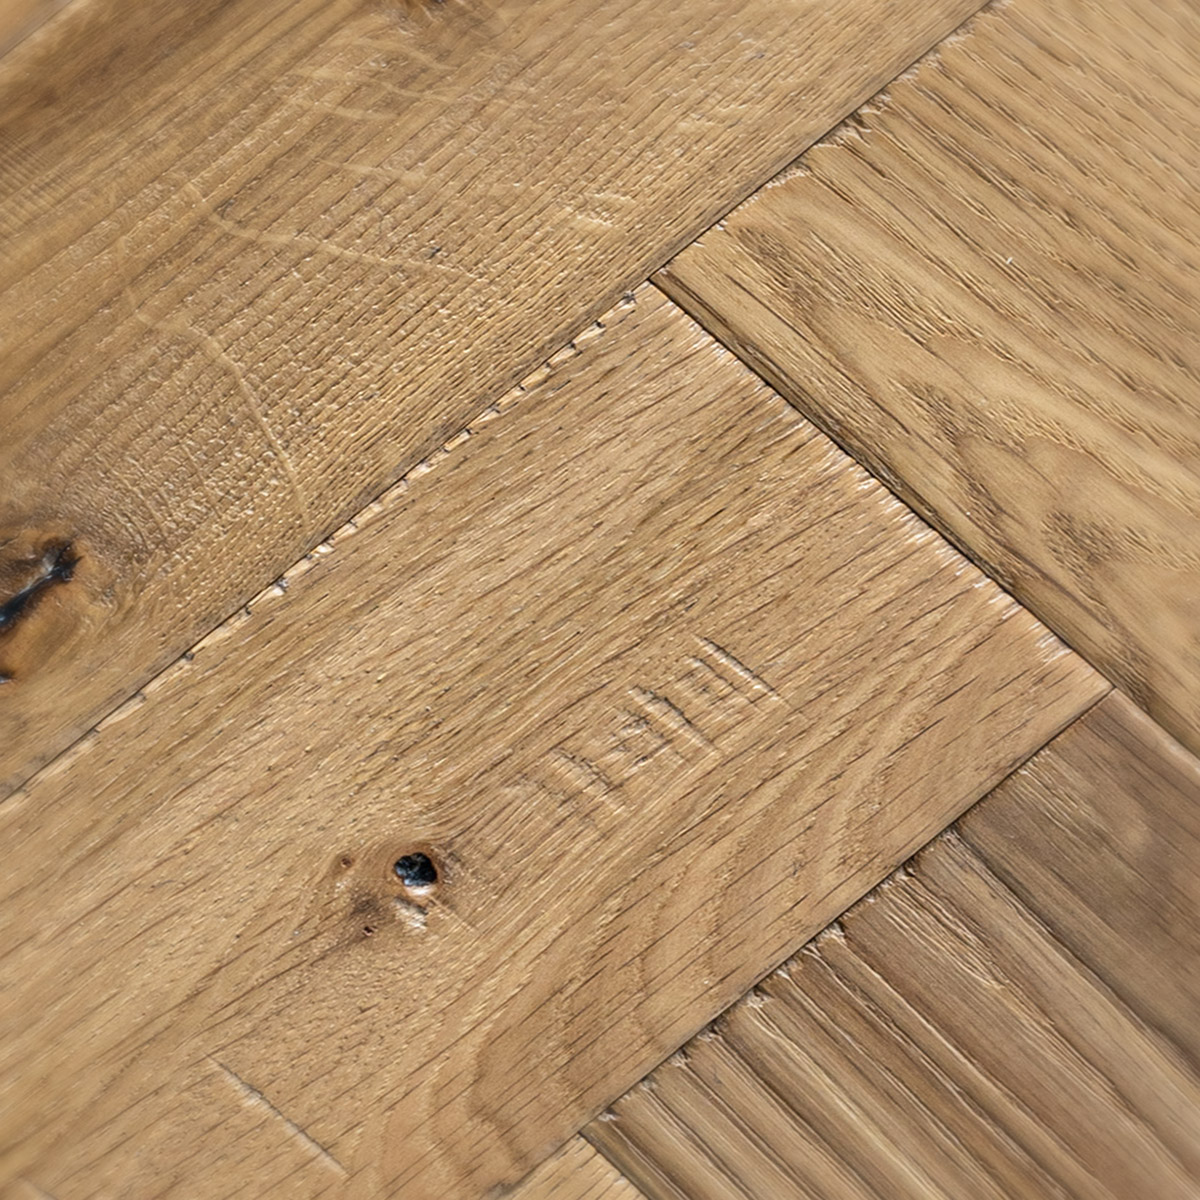 Rustic-grade European oak floor with a hand worked surface texture